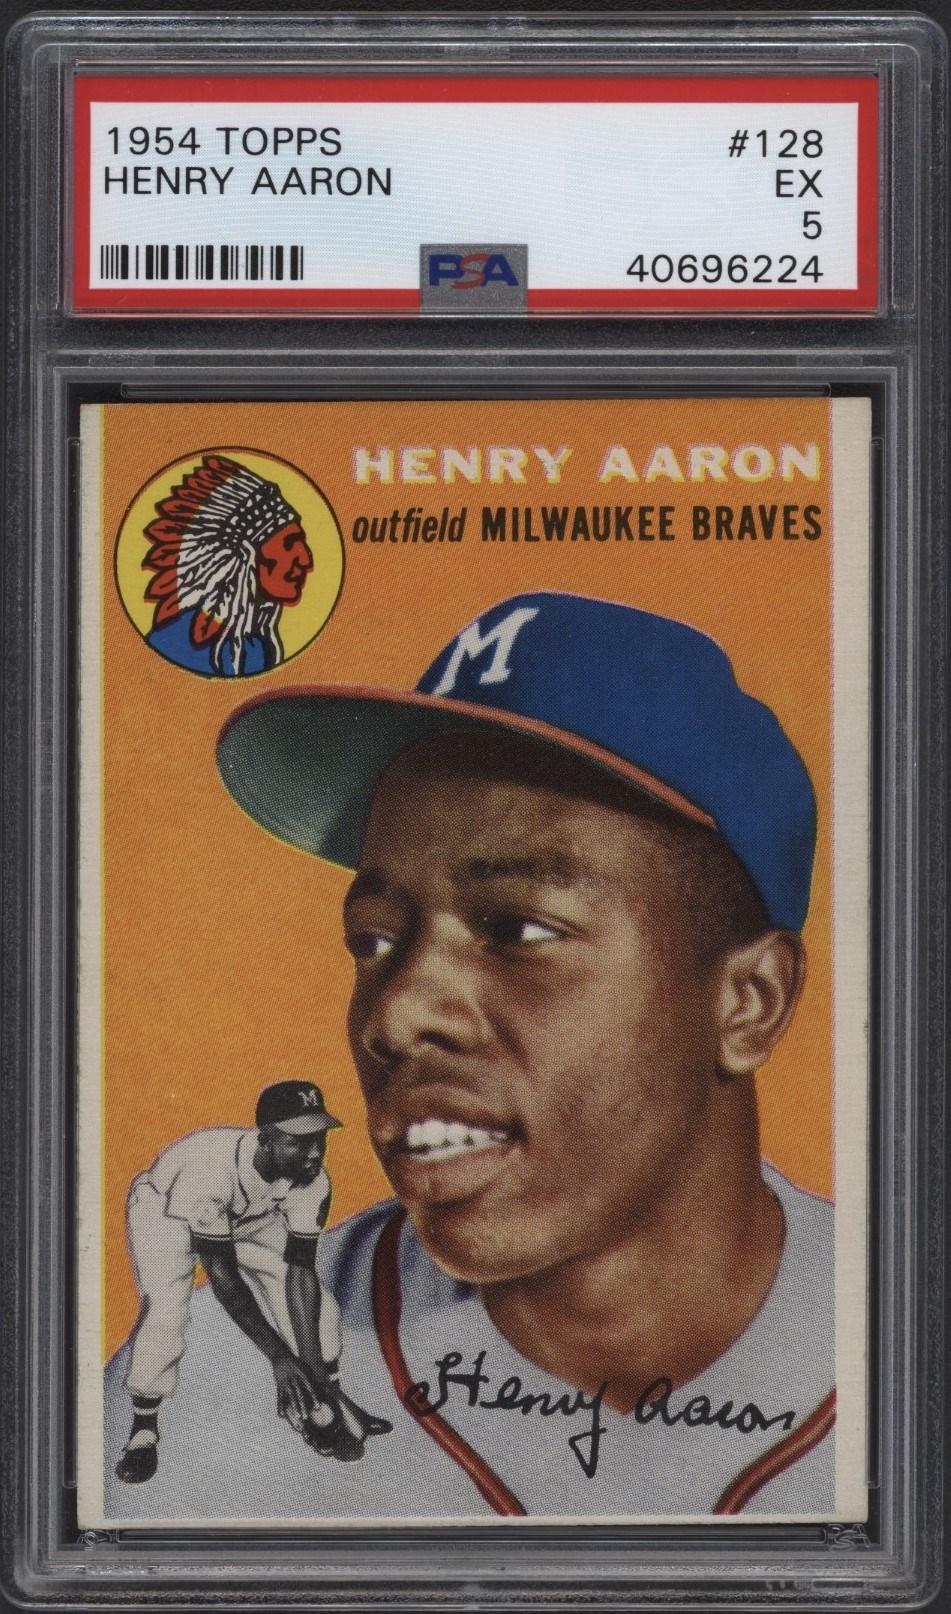 Baseball and Trading Cards - 1954 Topps #128 Henry Aaron Rookie Card - PSA EX 5